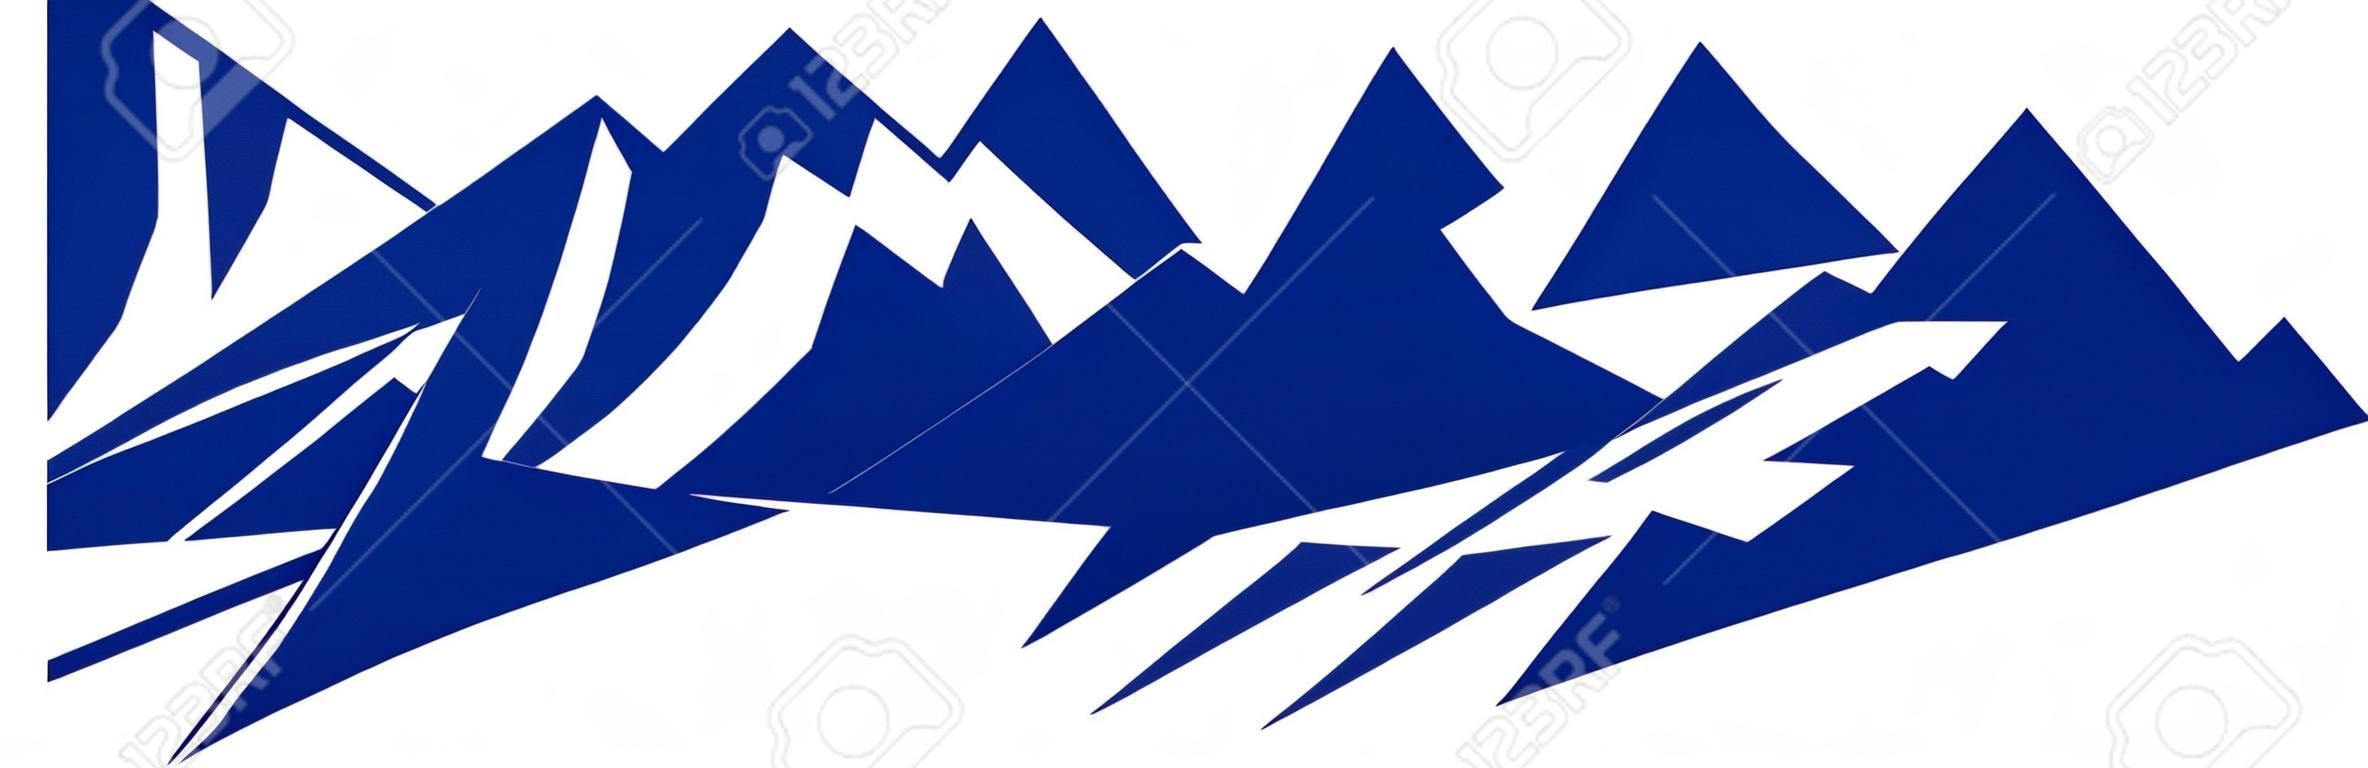 Silhouette blue mountain with three peaks on white background â€“ vector